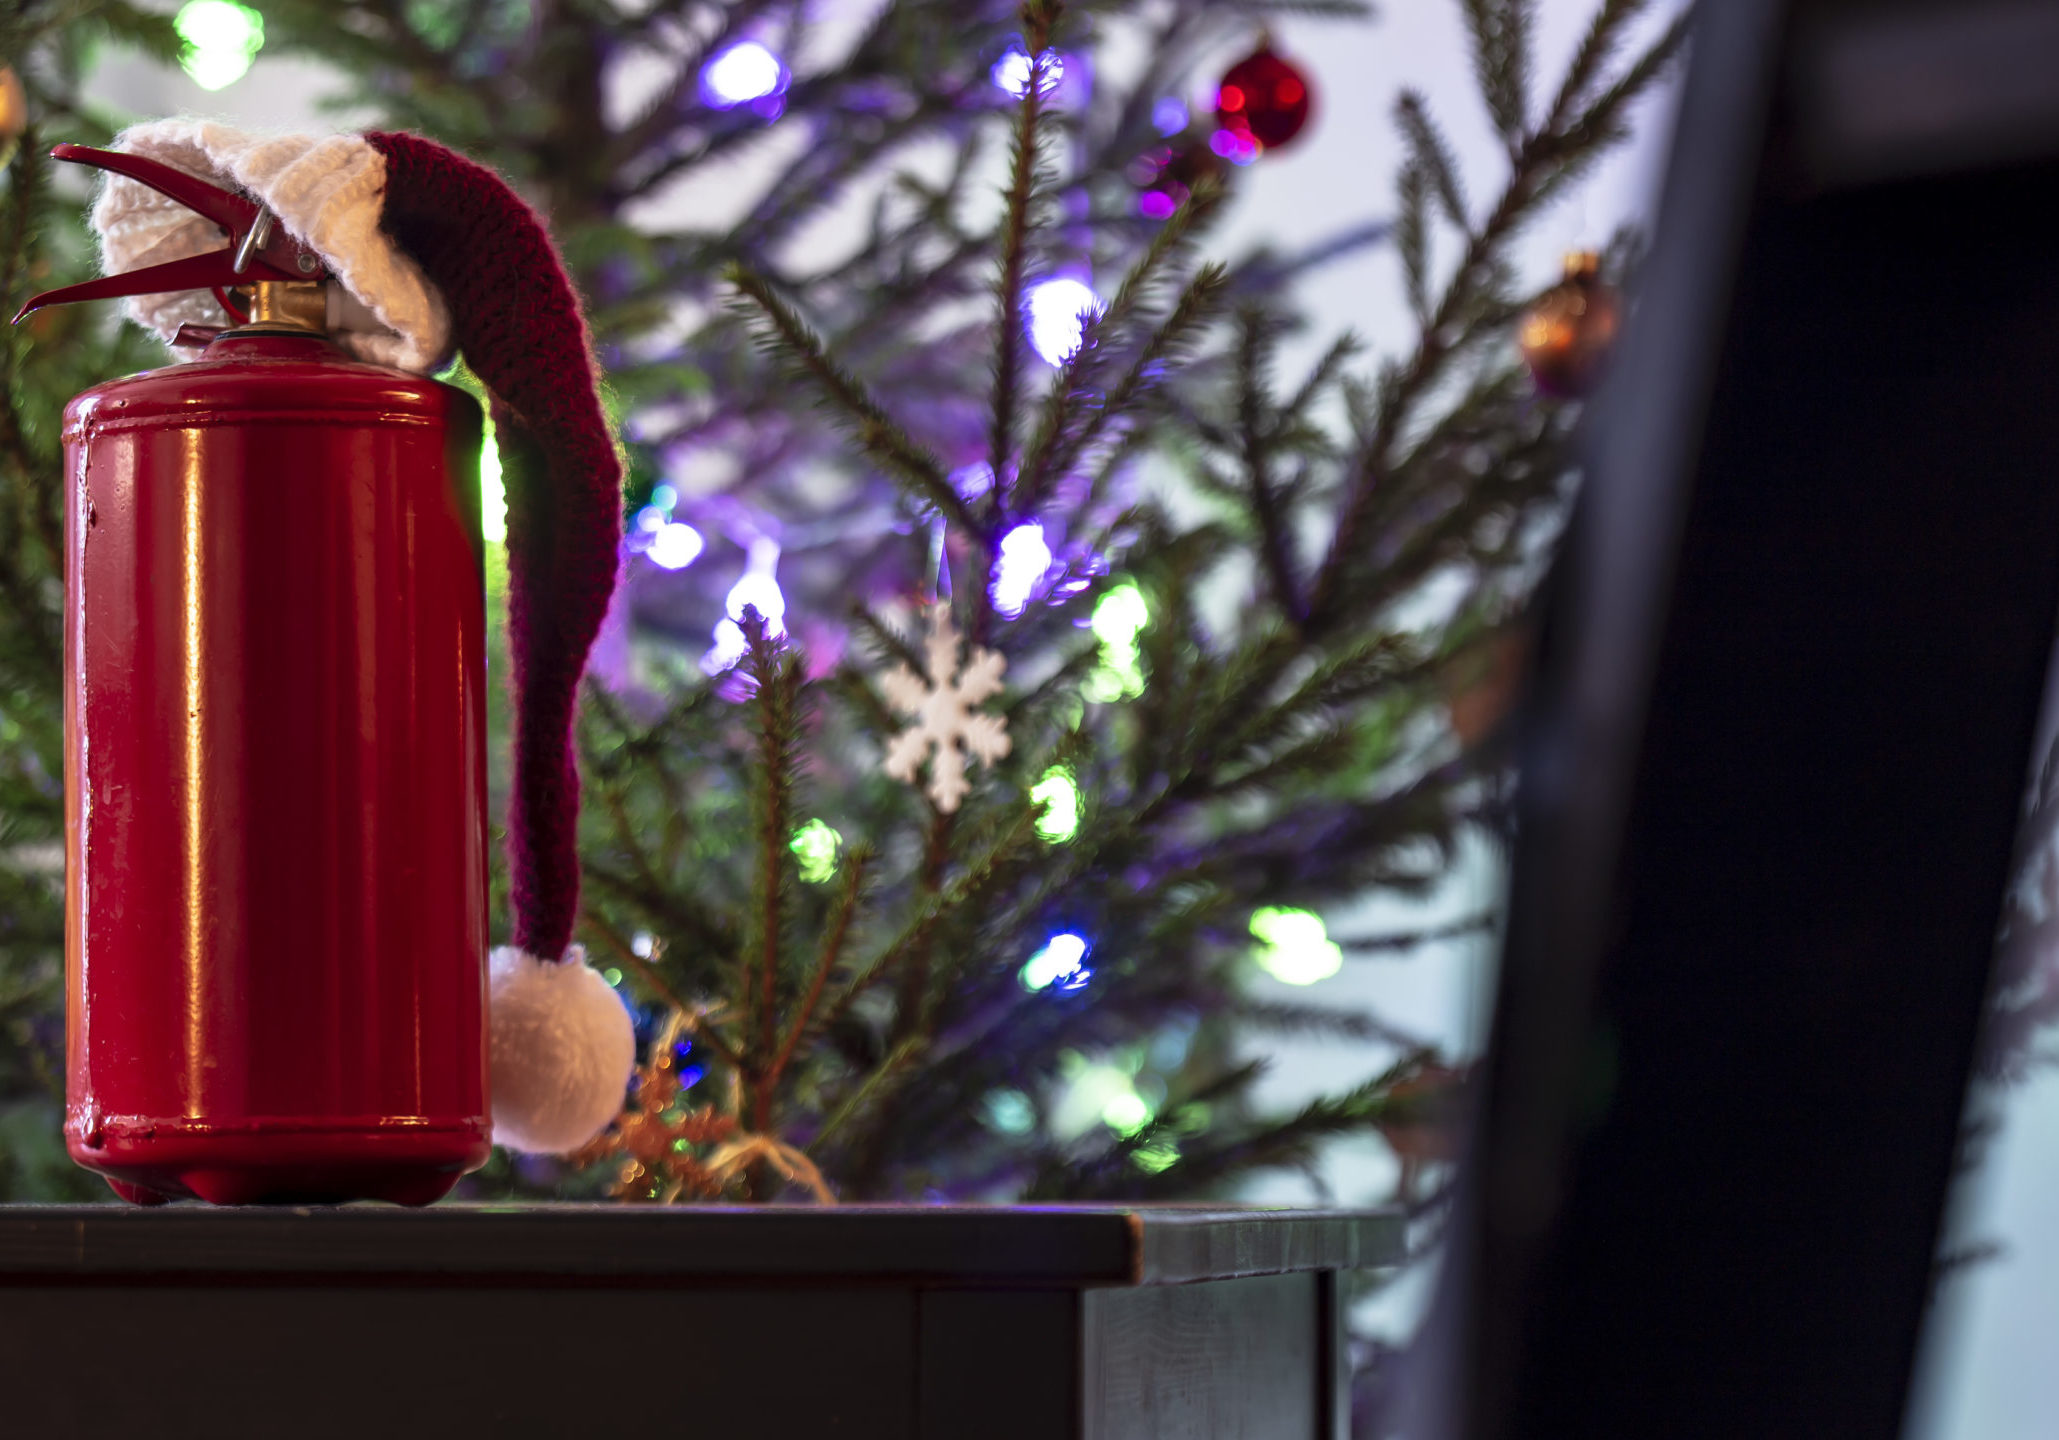 Extinguisher in red cap of Santa Claus standing on a black wooden table against the background of the Christmas tree, decorated with colorful garlands and toys, in a homelike atmosphere. Safety concept.